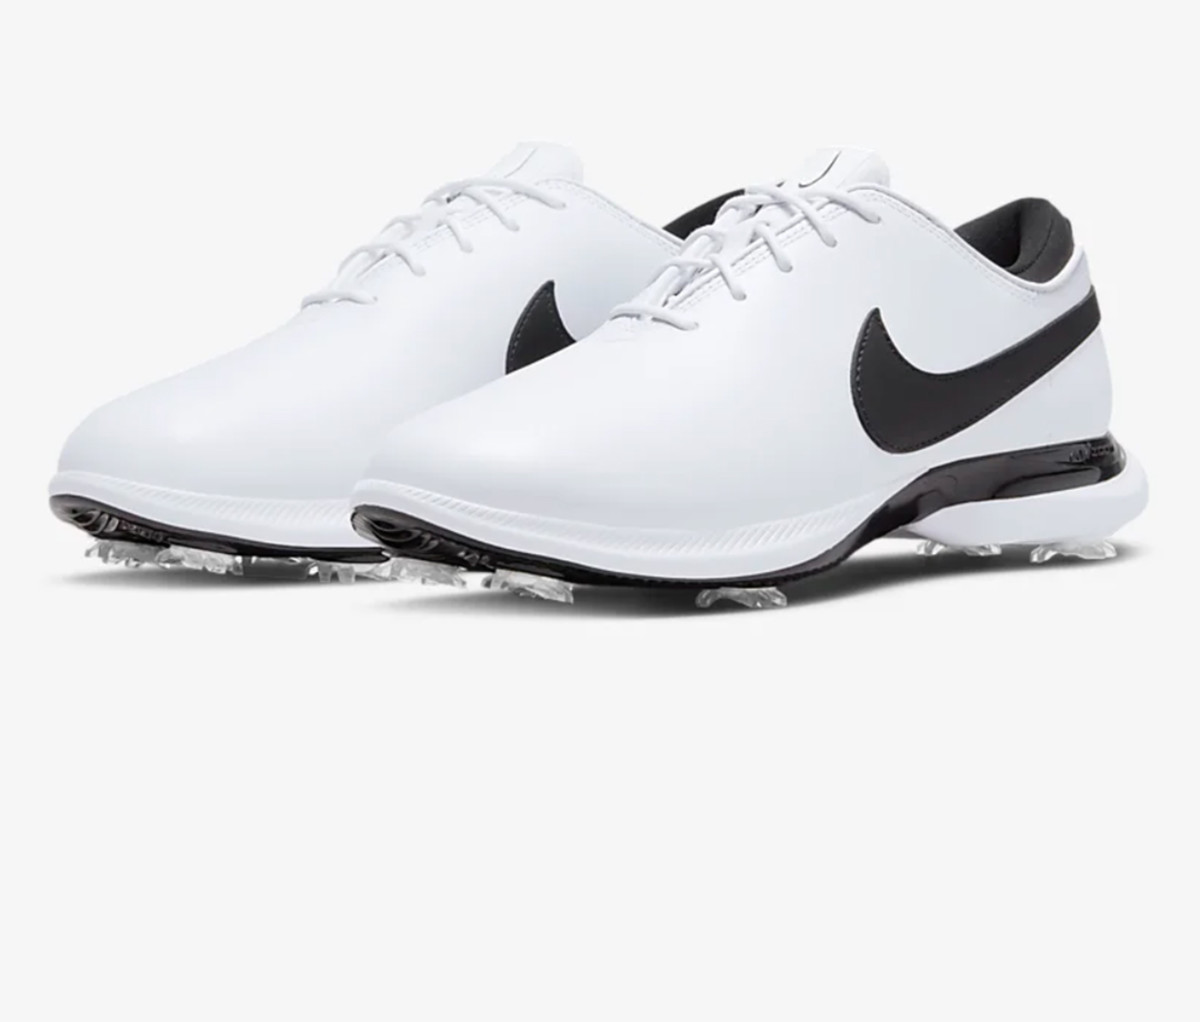 Load up On Father's Day Gifts With These Winning Selections From Nike ...